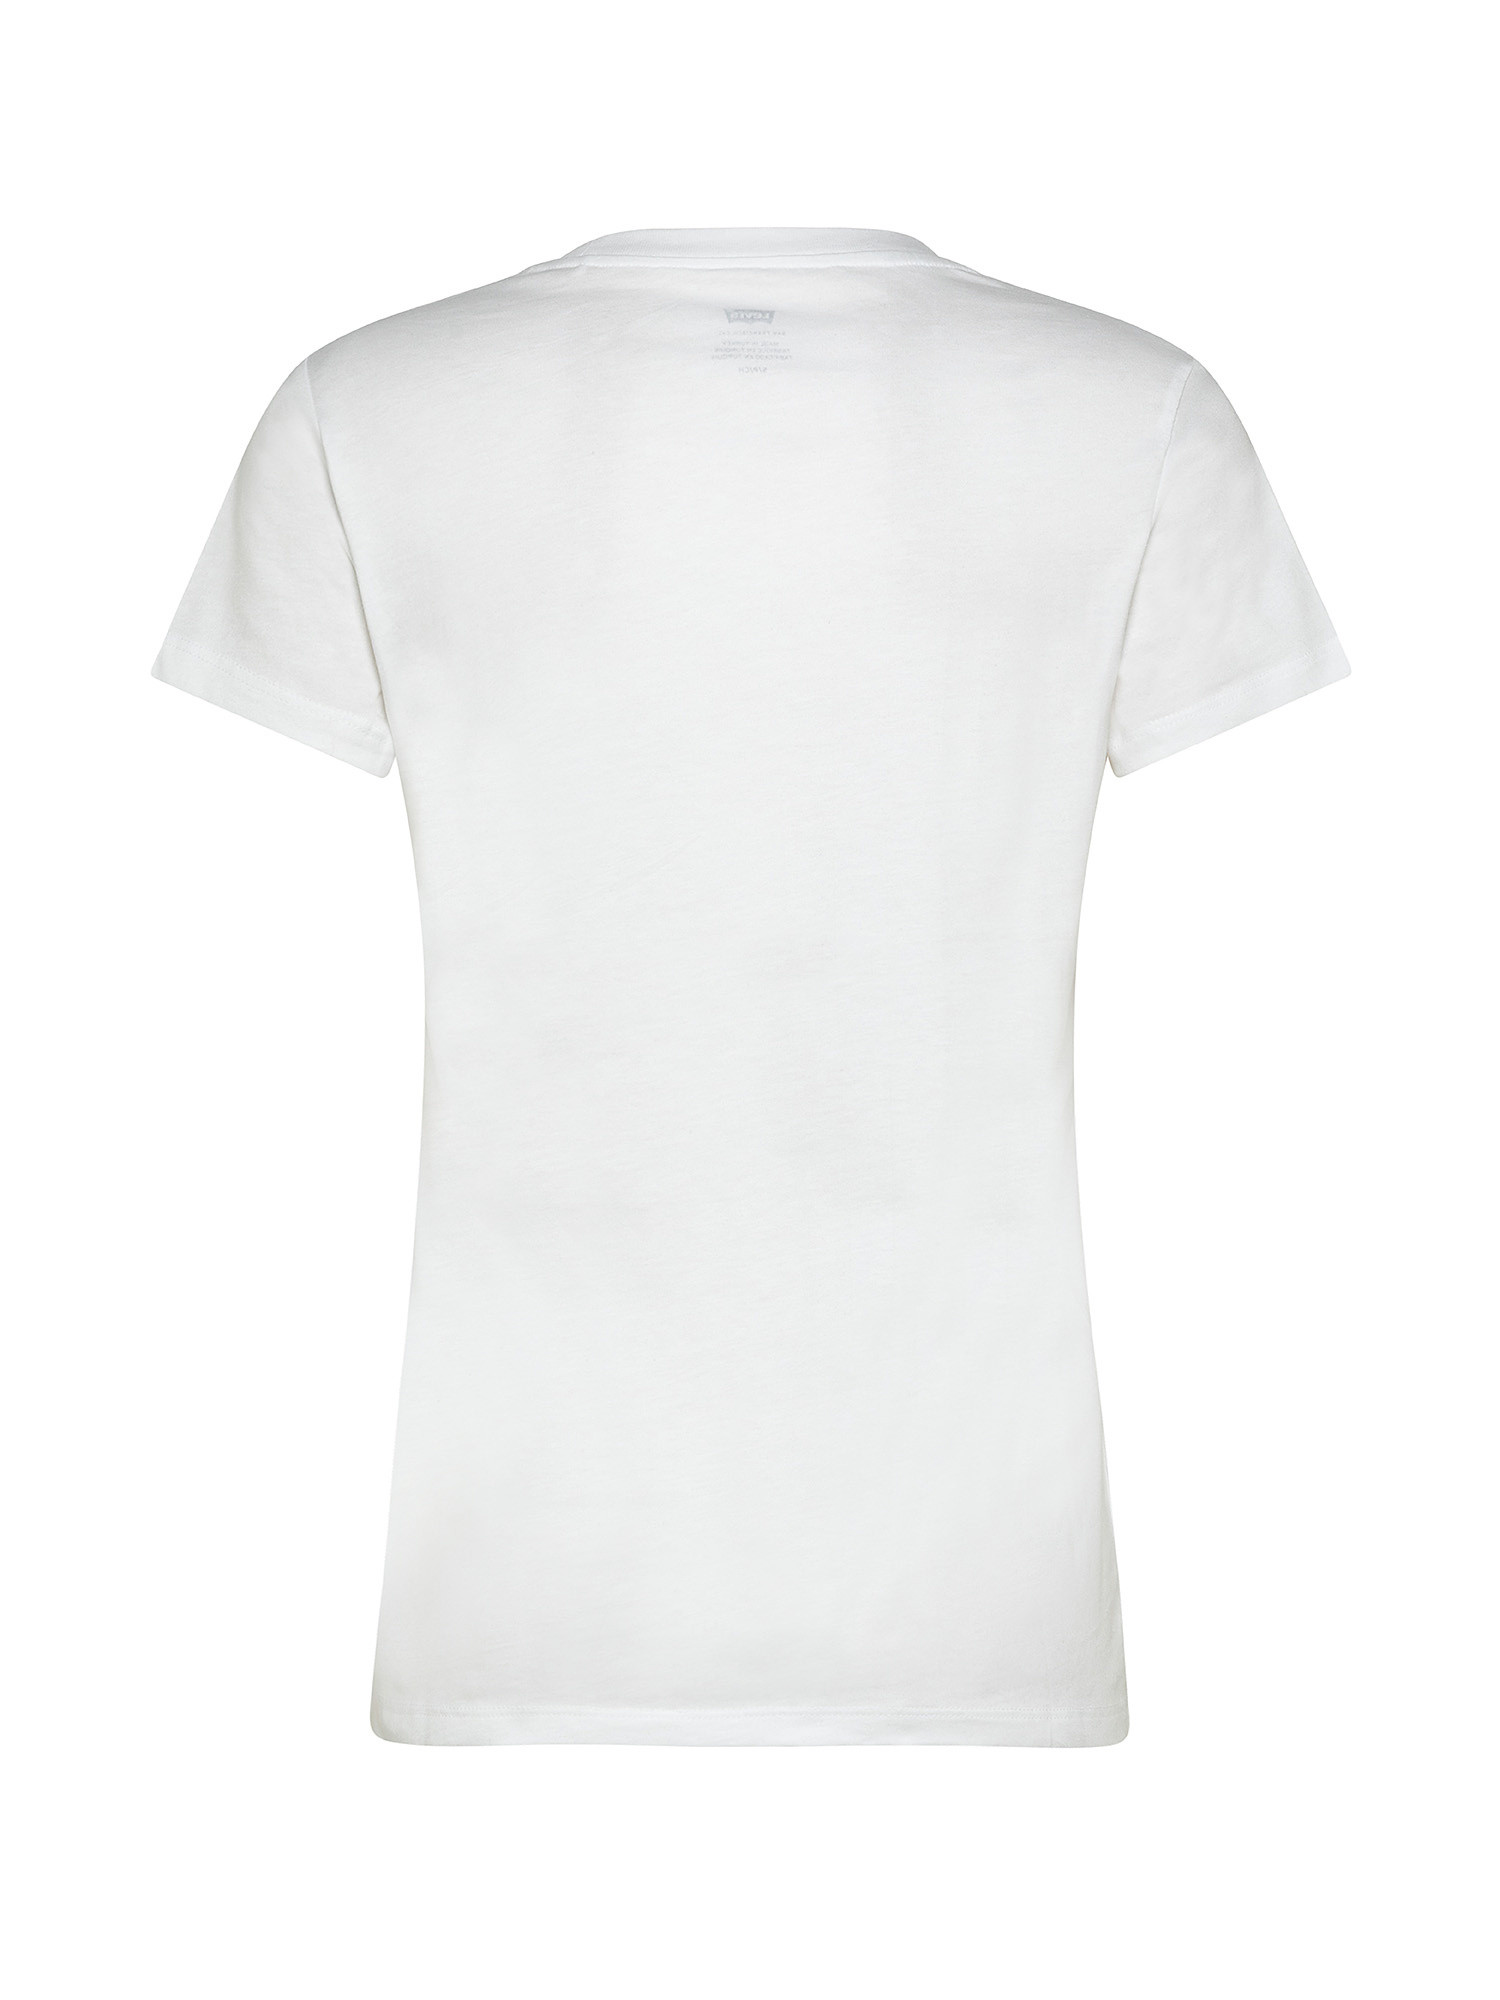 T-shirt Perfect Tee con logo , Bianco, large image number 1